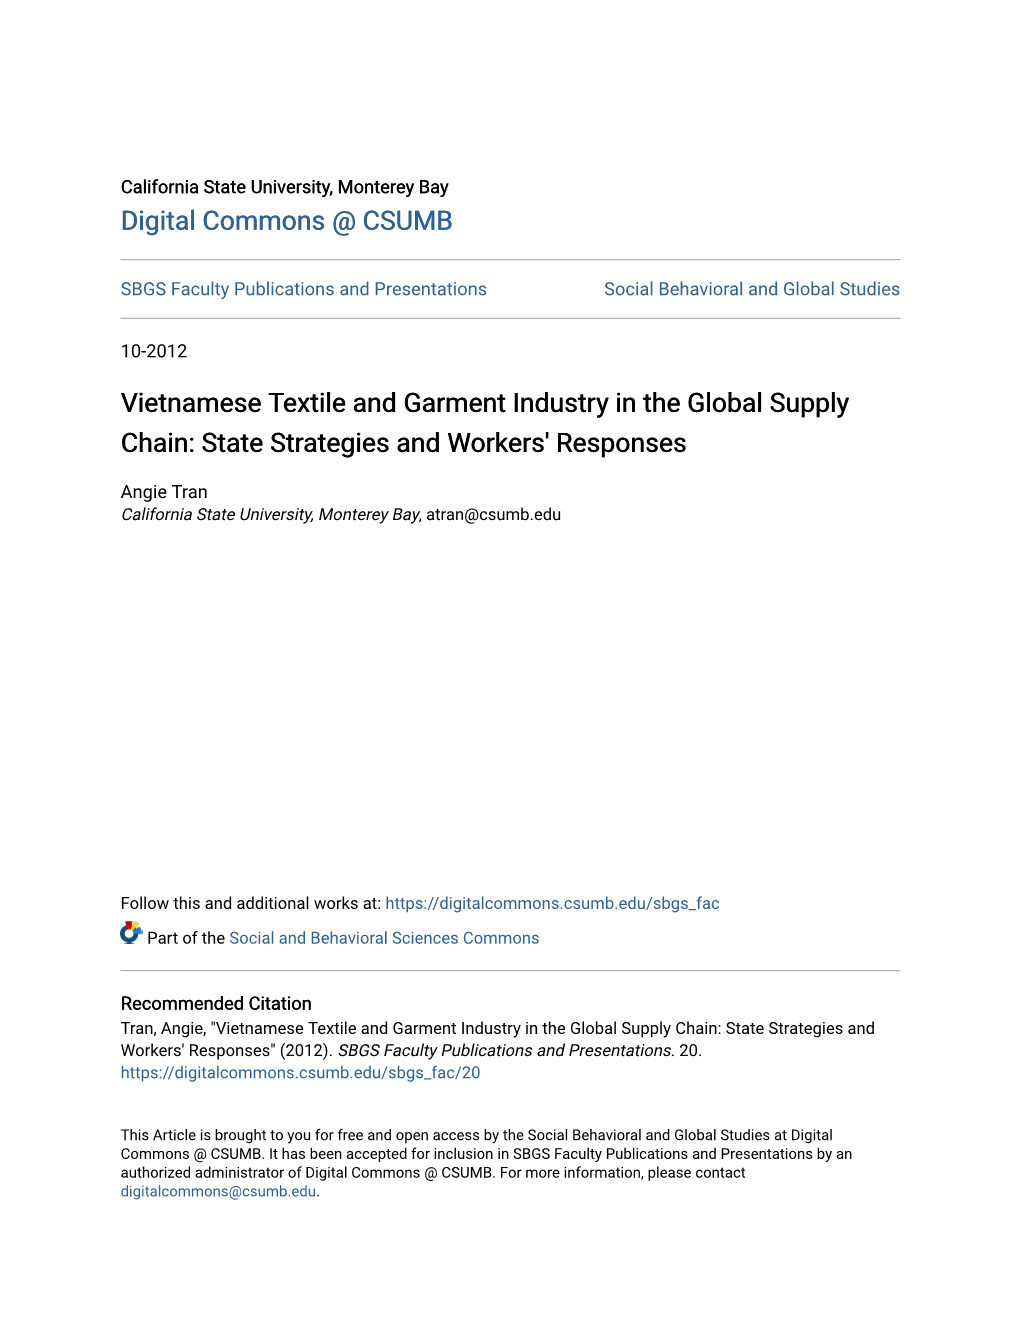 Vietnamese Textile and Garment Industry in the Global Supply Chain: State Strategies and Workers' Responses